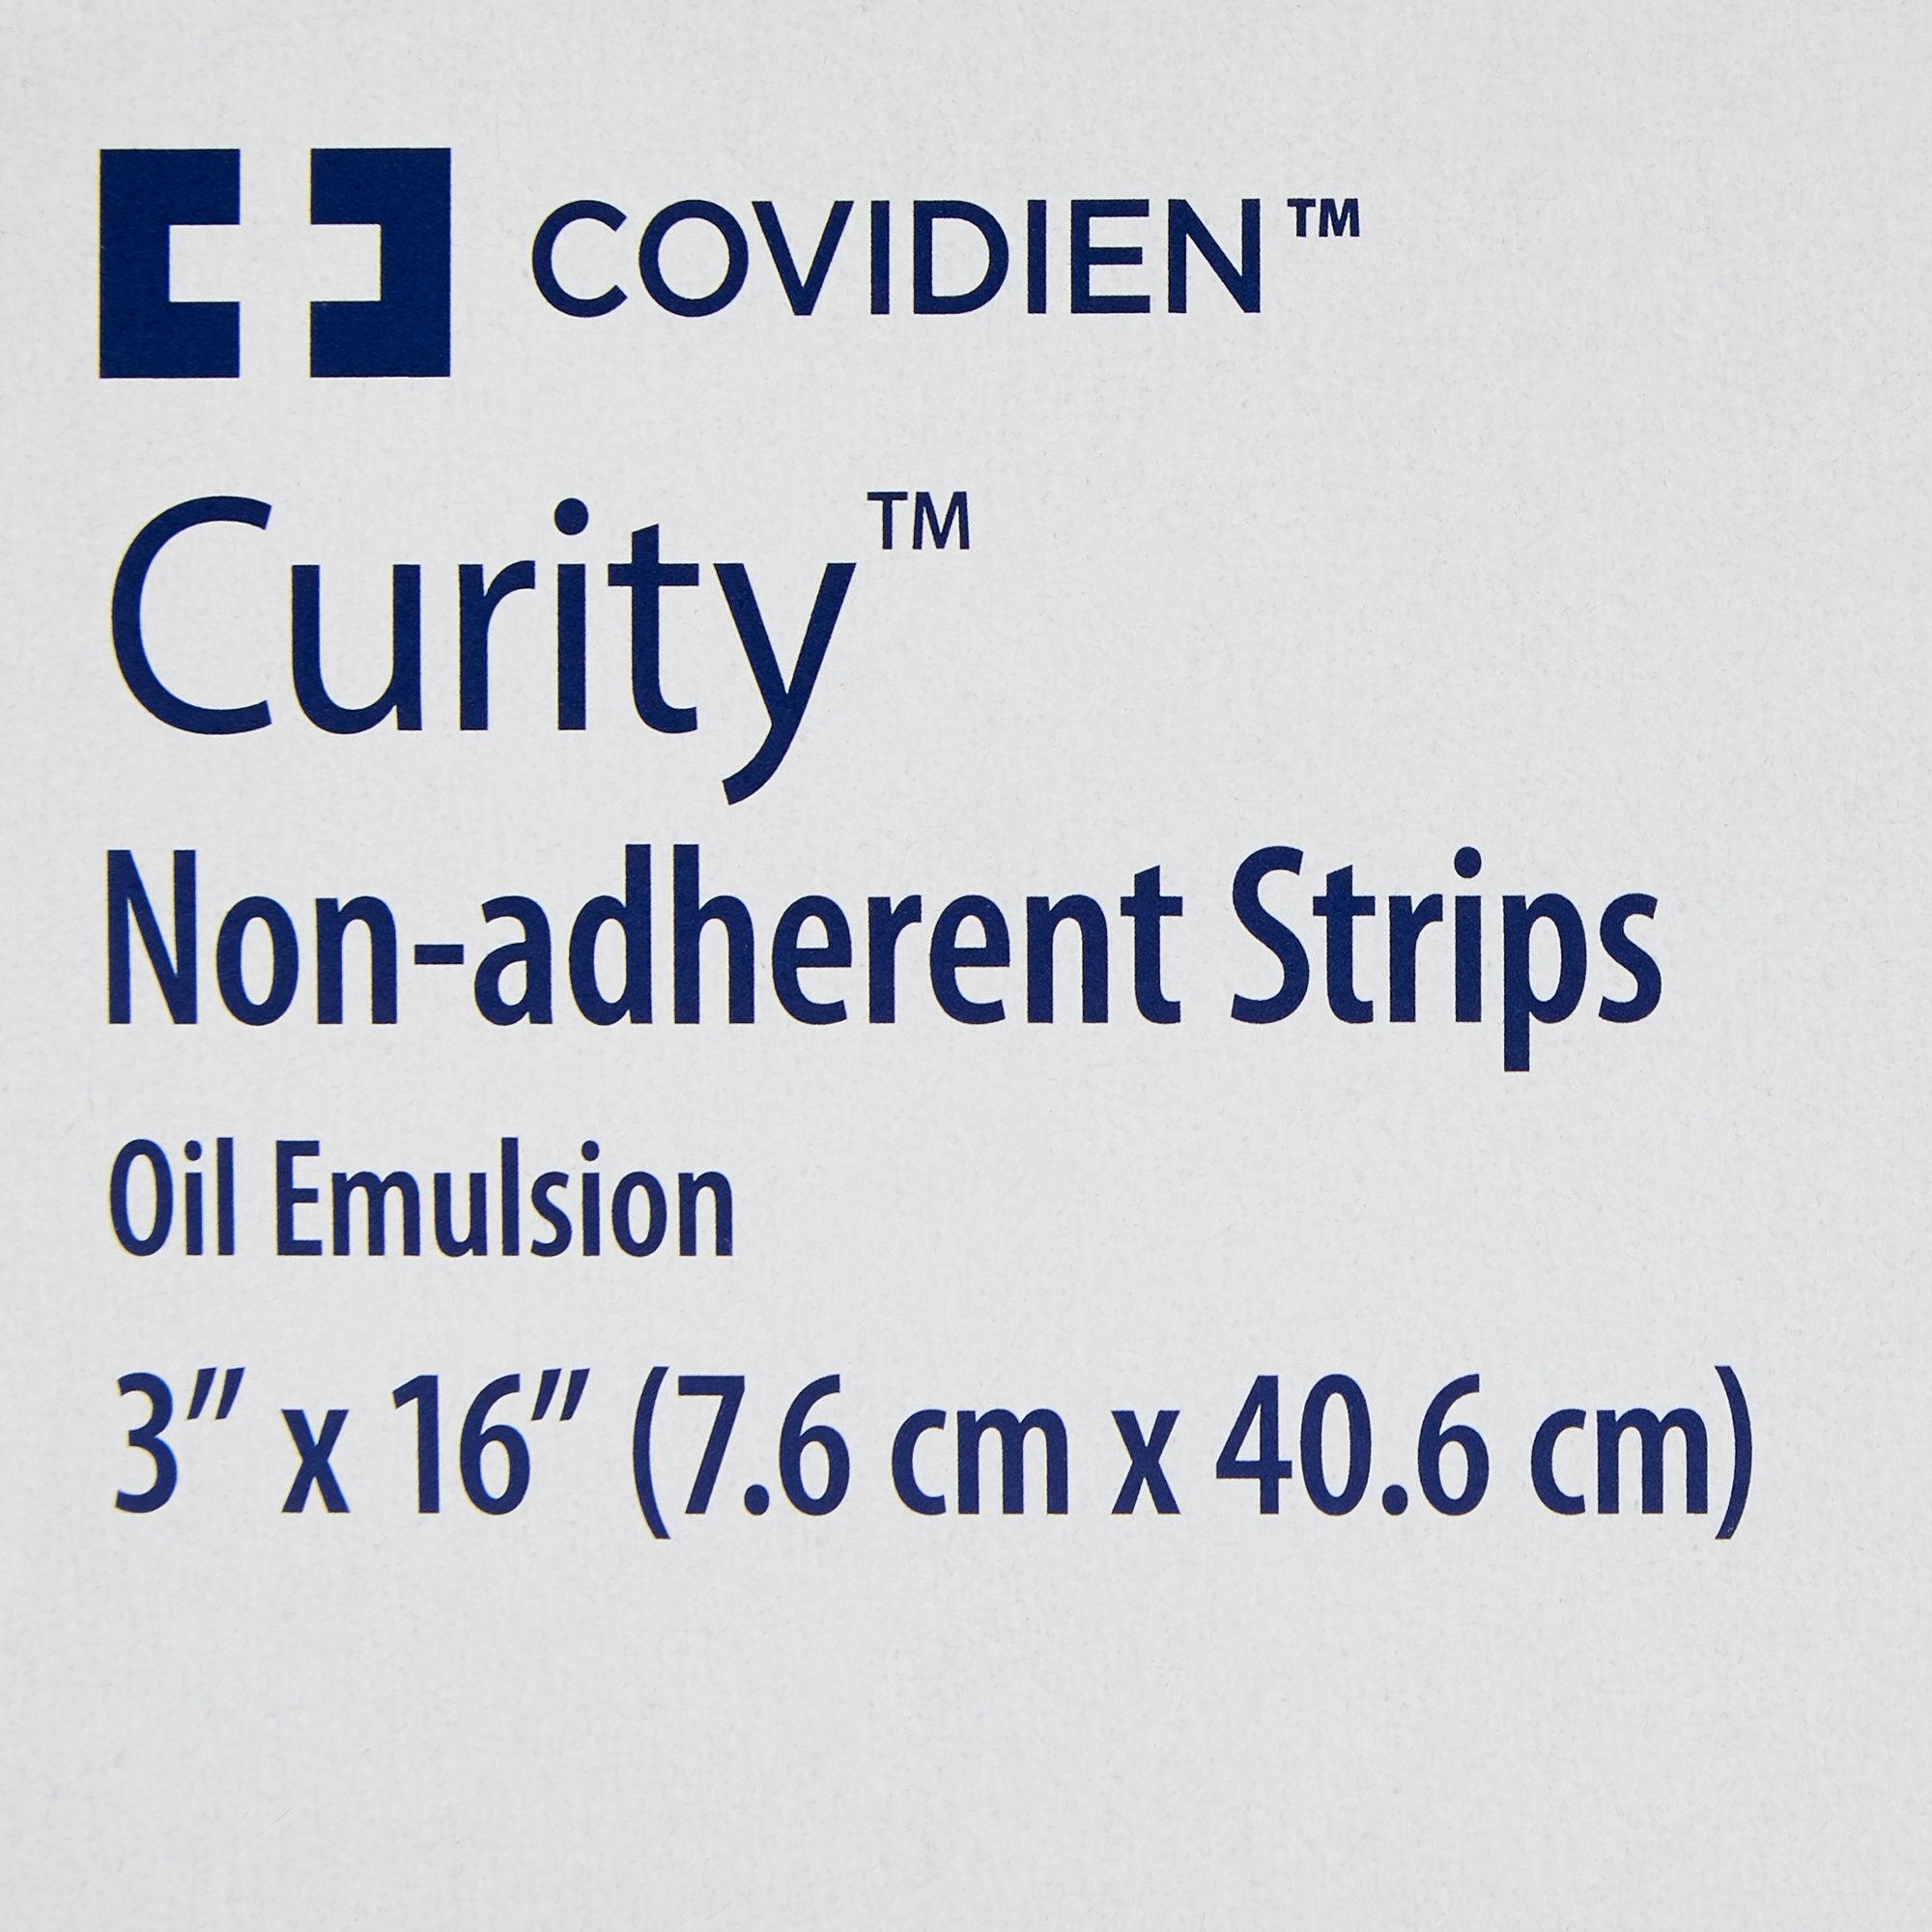 Oil Emulsion Impregnated Dressing Curity Rectangle 3 X 16 Inch Sterile